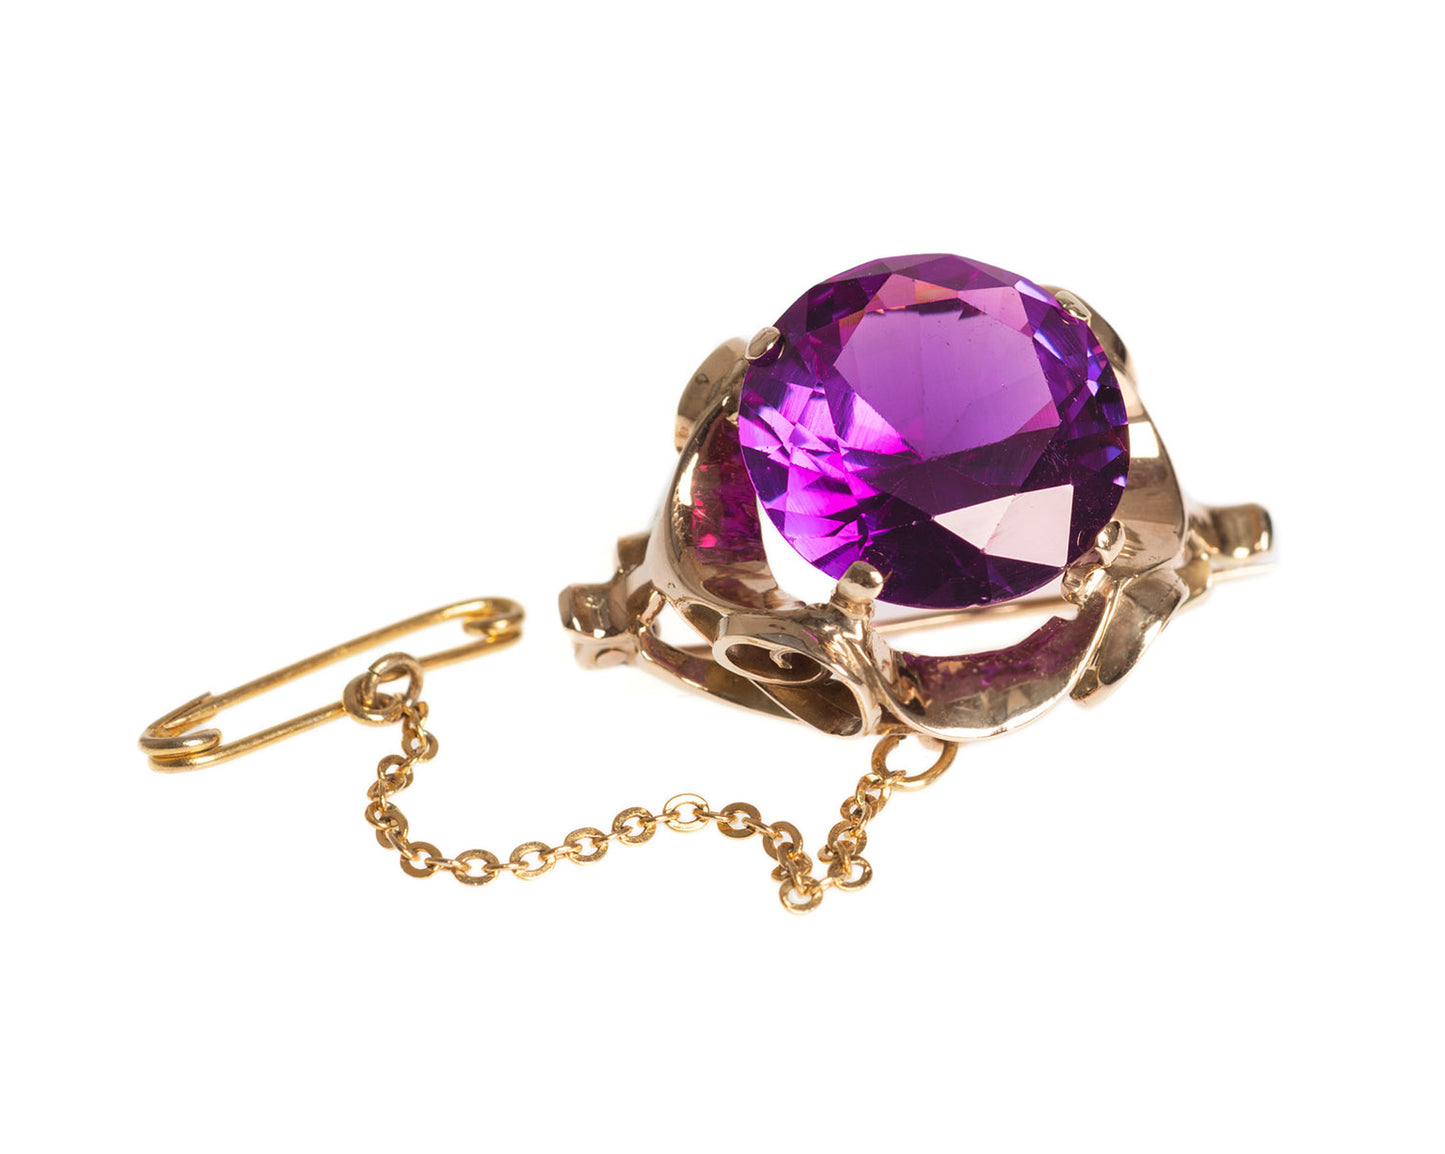 Vintage 9ct Gold Brooch with Large 15 Carat Alexandrite Colour Change Sapphire (Code 2432)